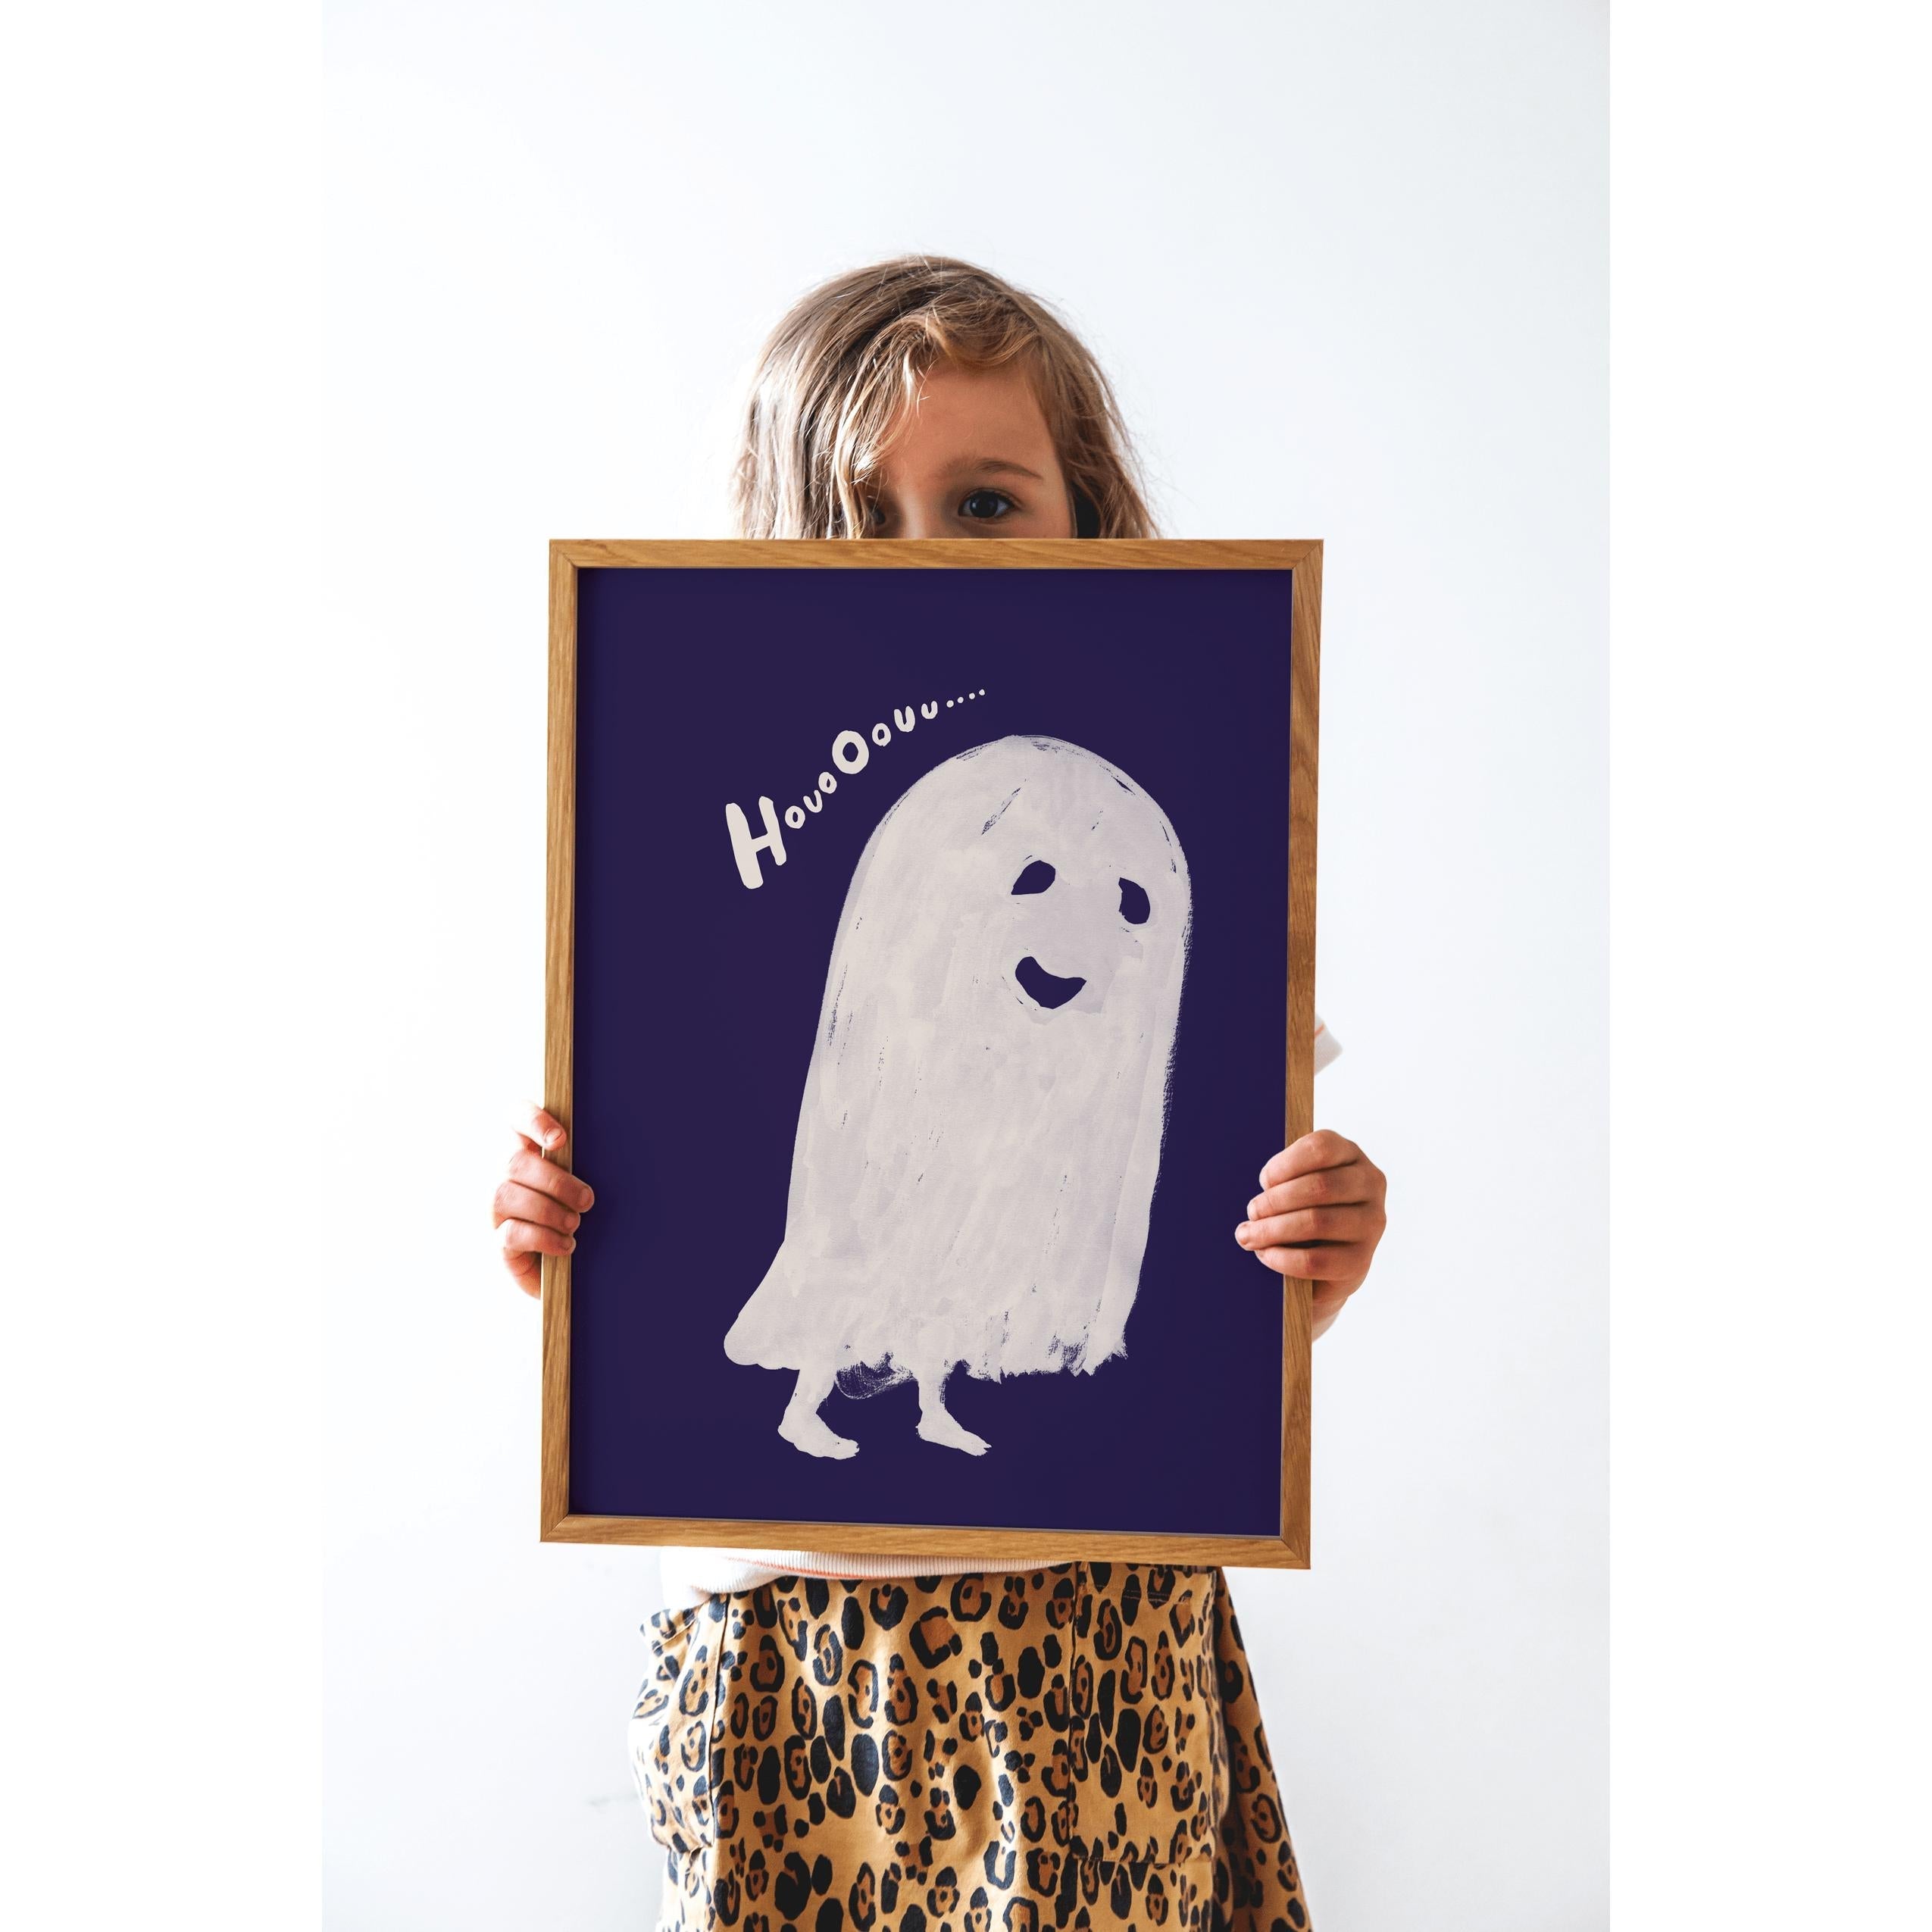 Paper Collective Houo Oouu Poster 30x40 Cm, White